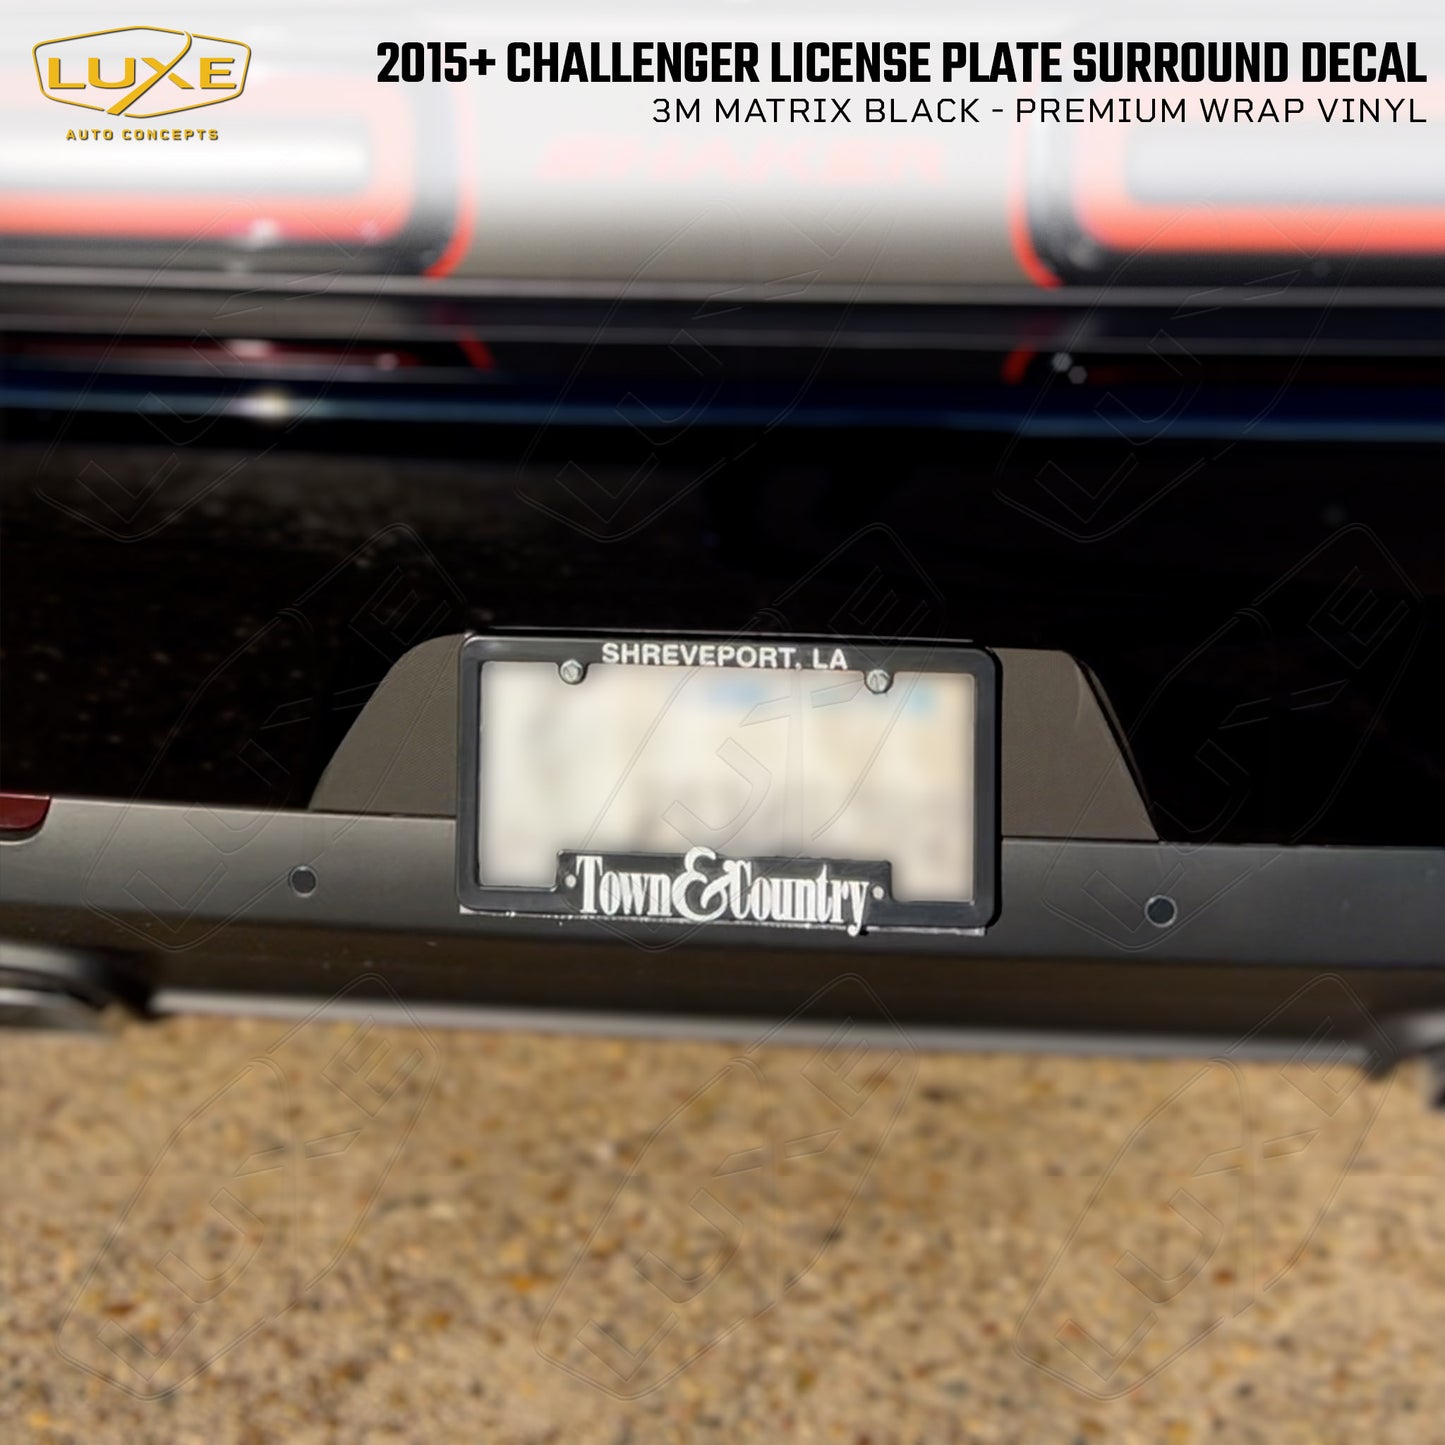 2015+ Challenger License Plate Surround Decal